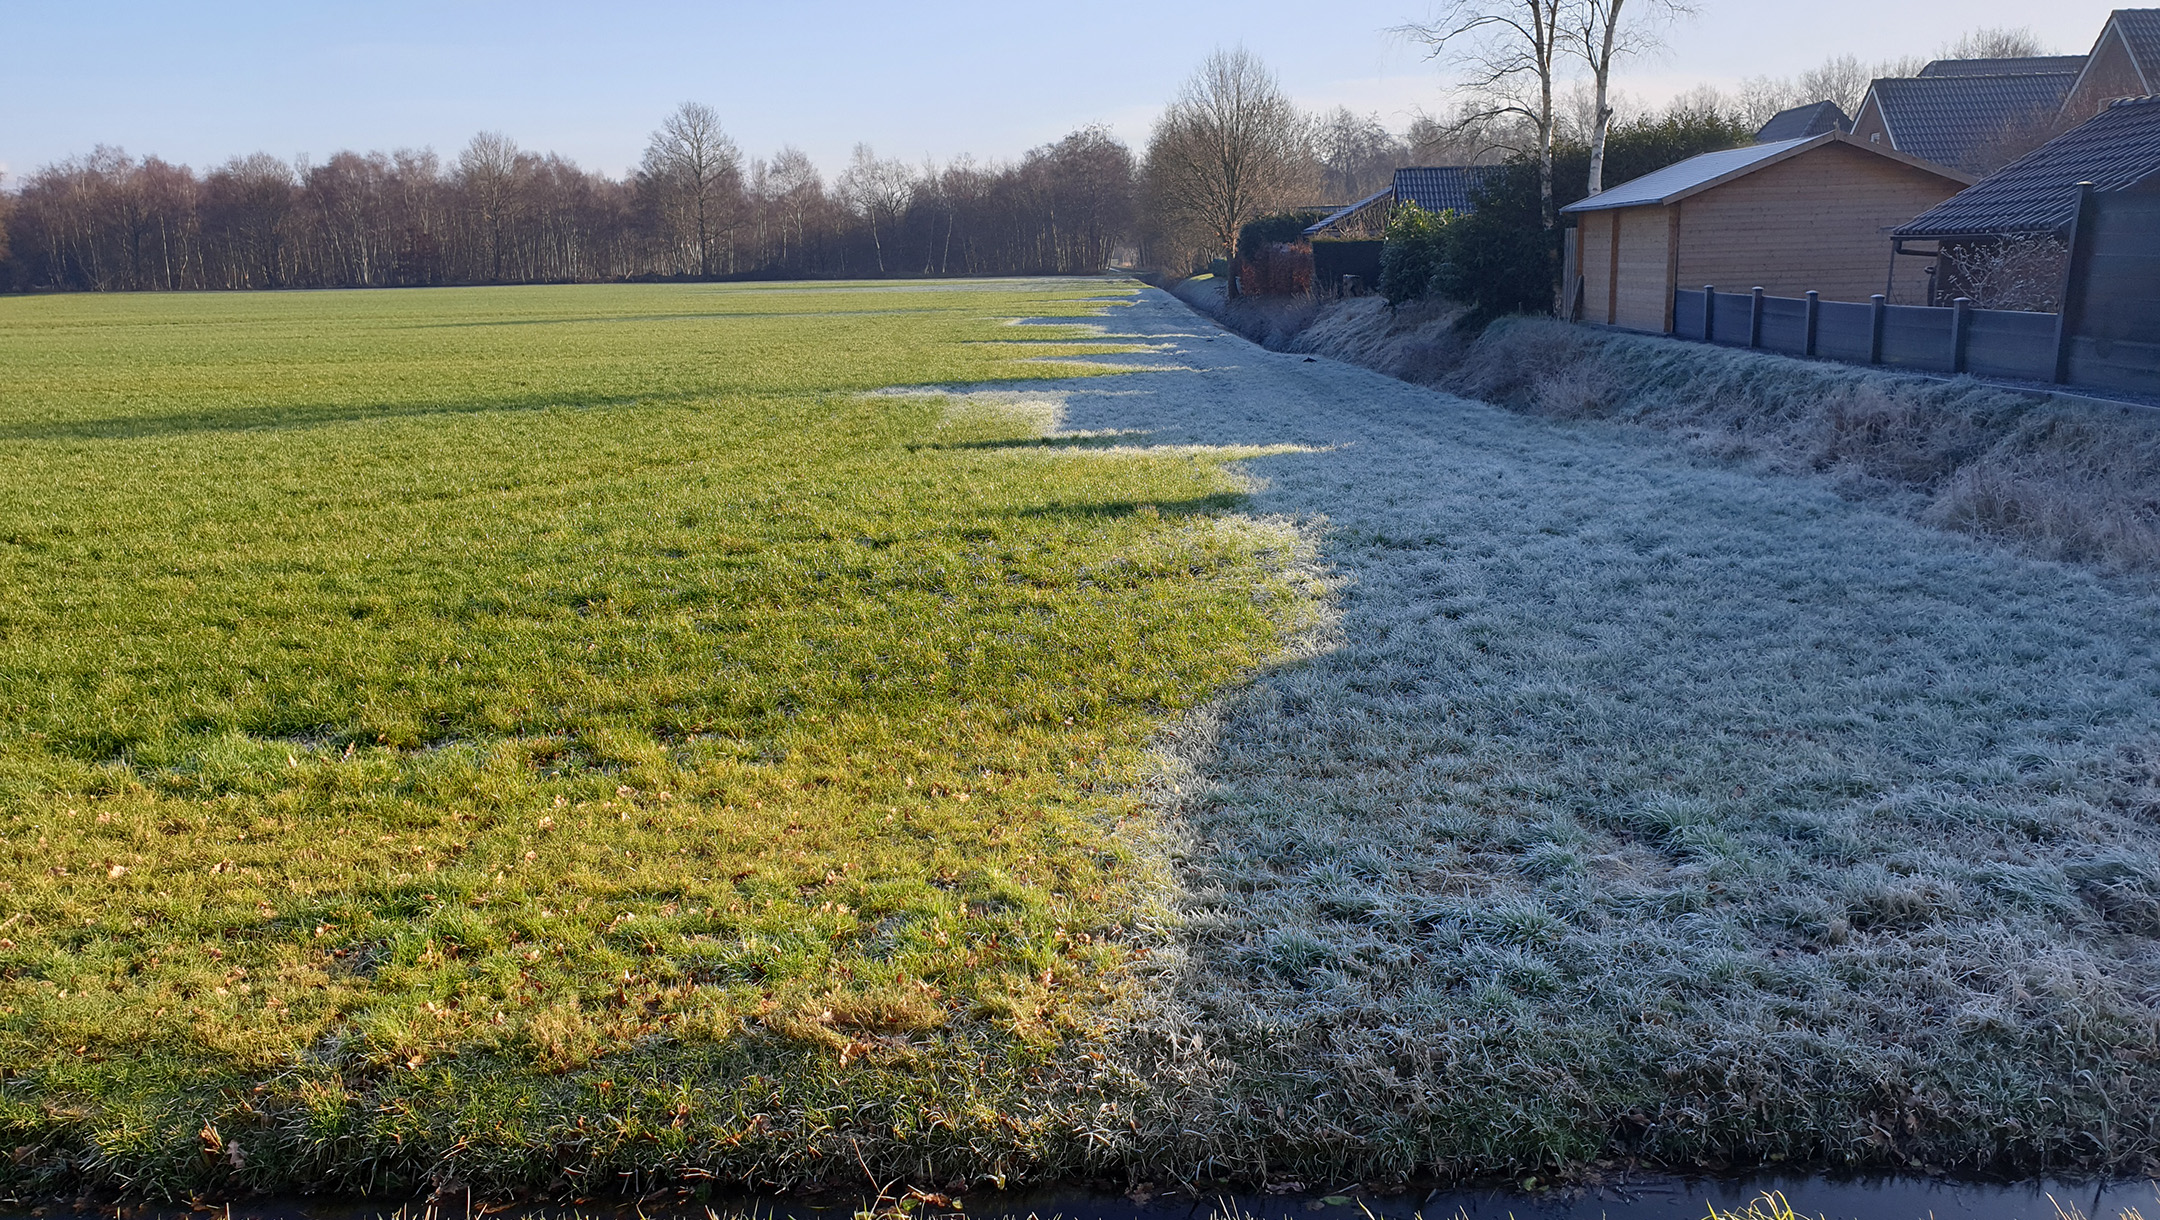 Frost recedes from the sunlight on the fields that divide the houses in the sprawling village of Nieuwlande, the Netherlands on Jan. 25, 2021. (Cnaan Liphshiz)